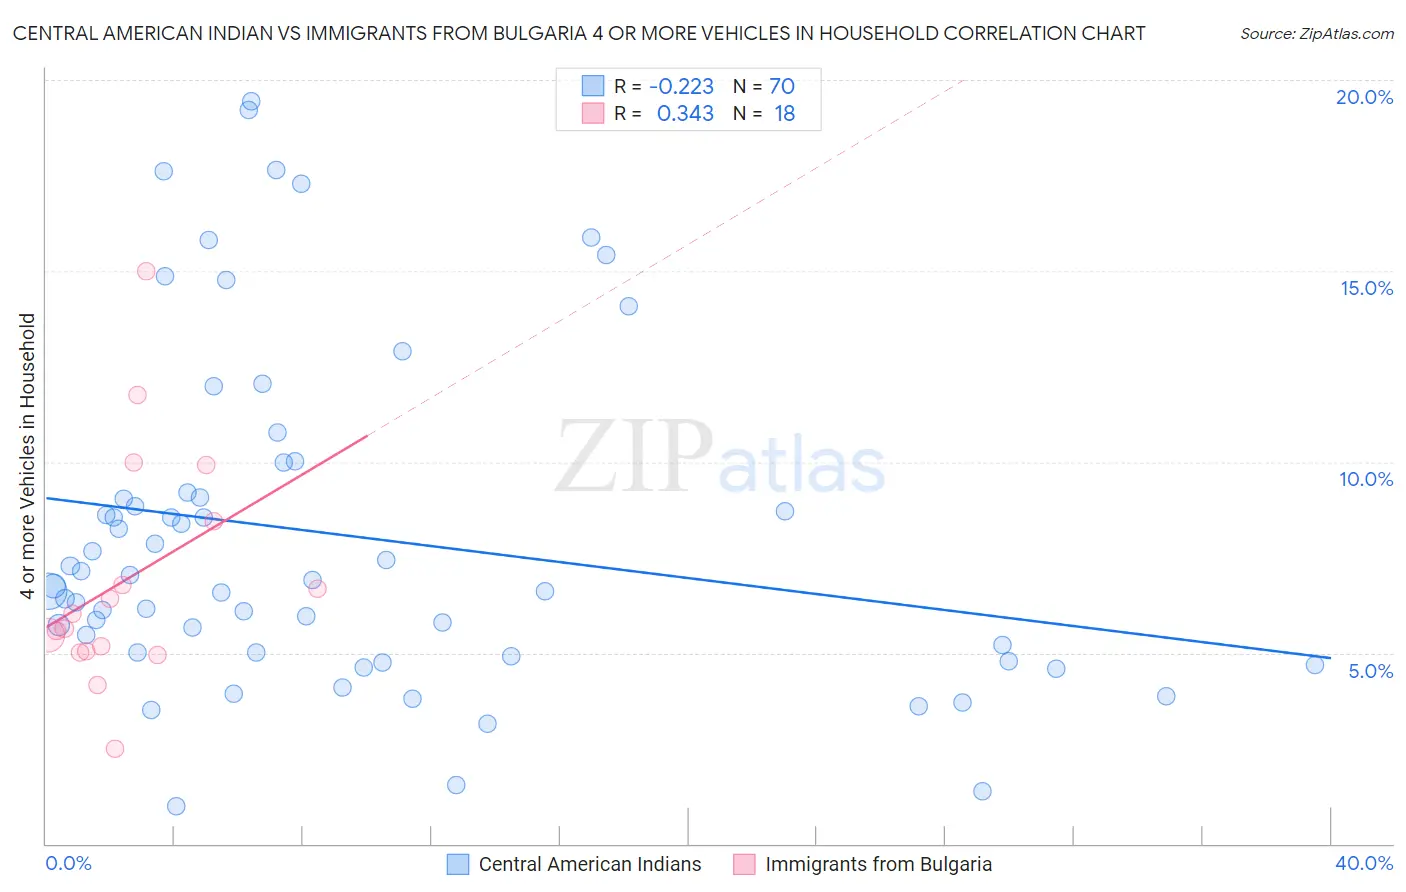 Central American Indian vs Immigrants from Bulgaria 4 or more Vehicles in Household